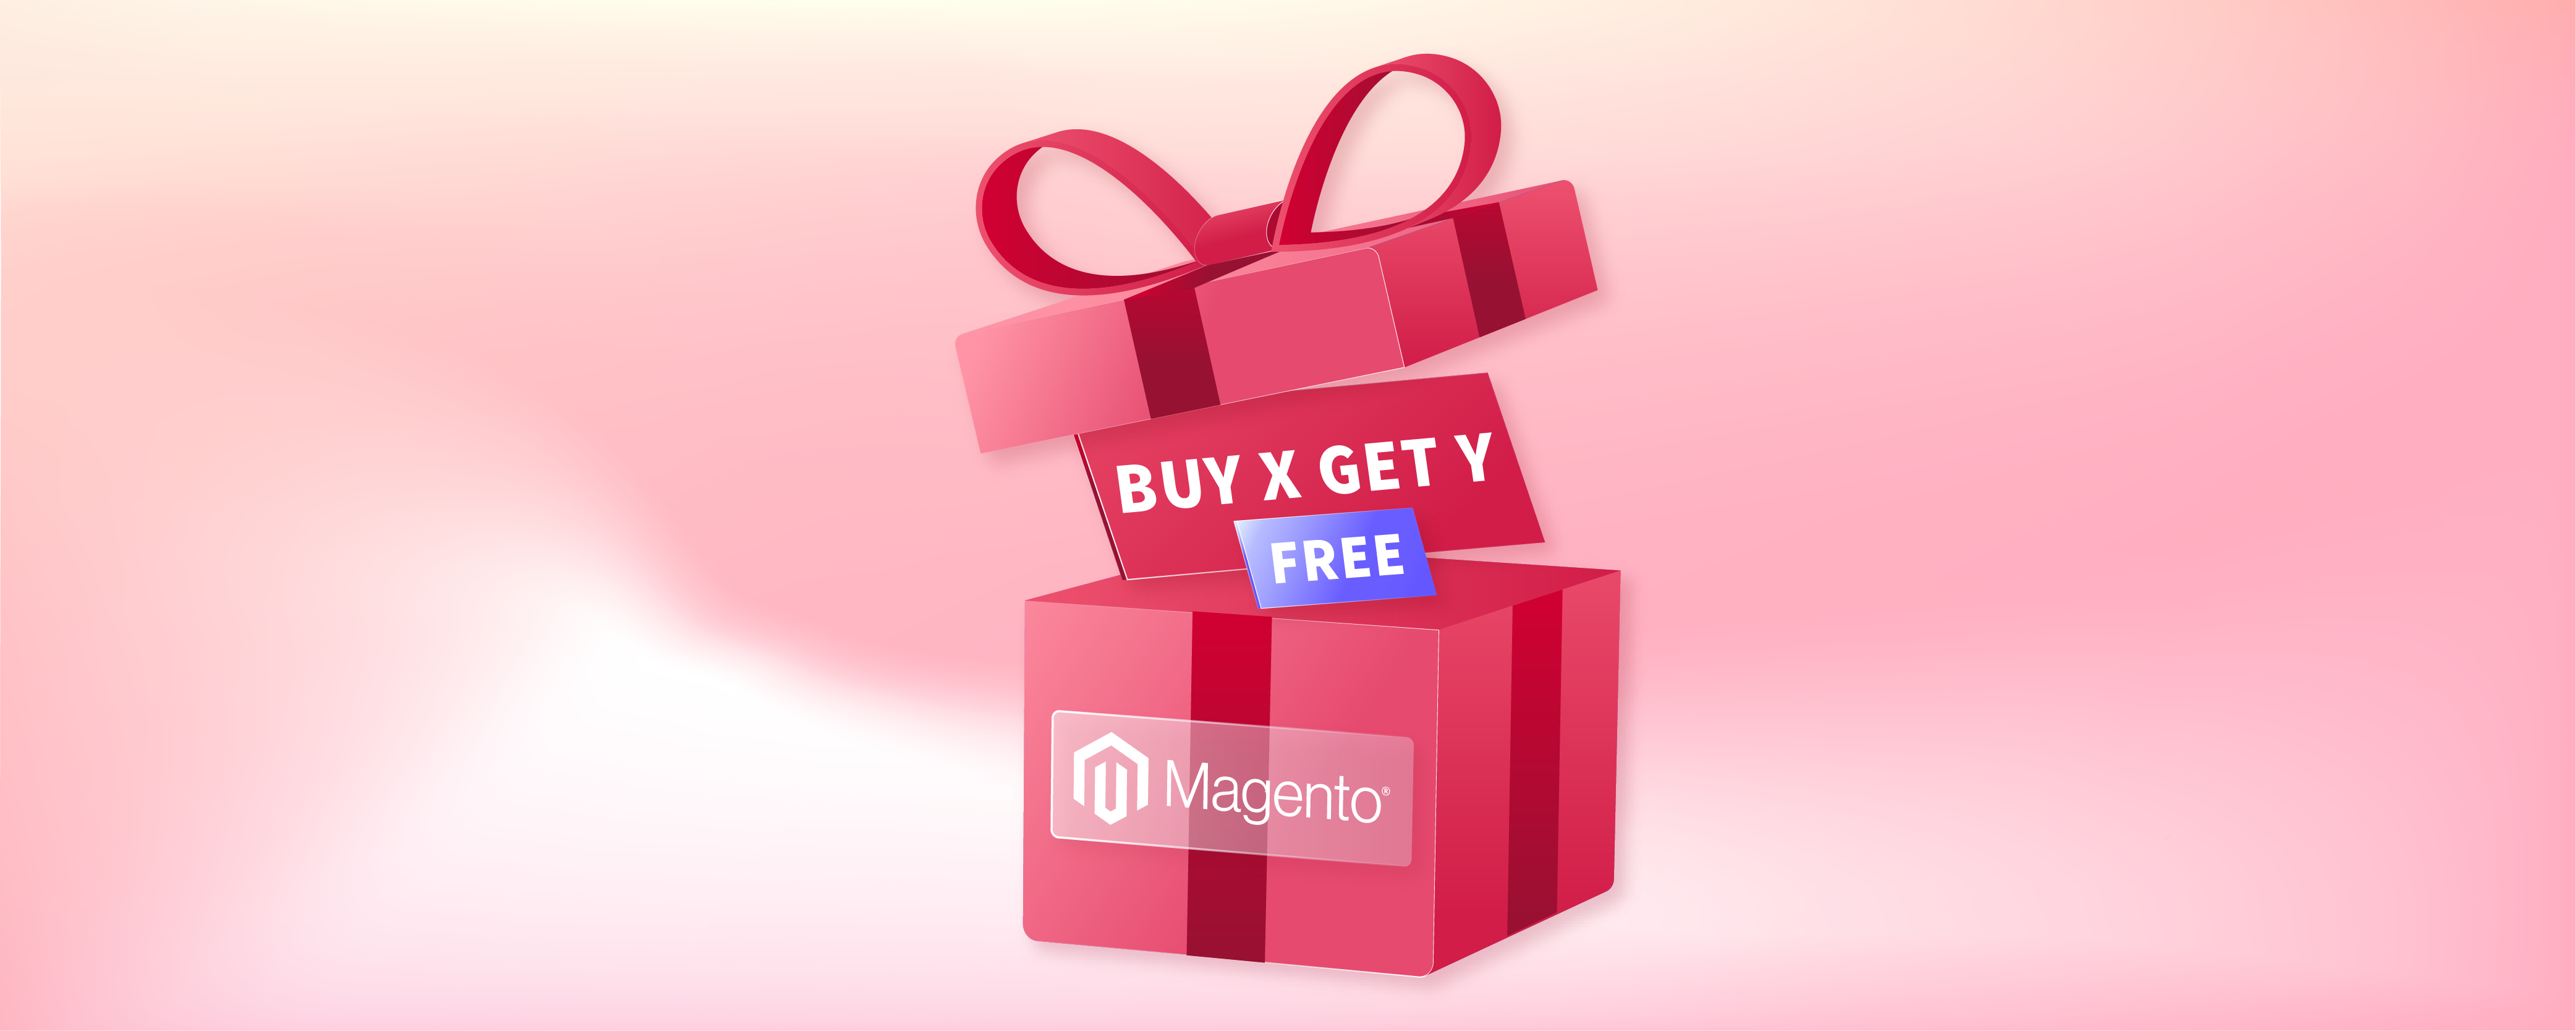 Setting Up Buy X Get Y Free Magento 2 Promotions